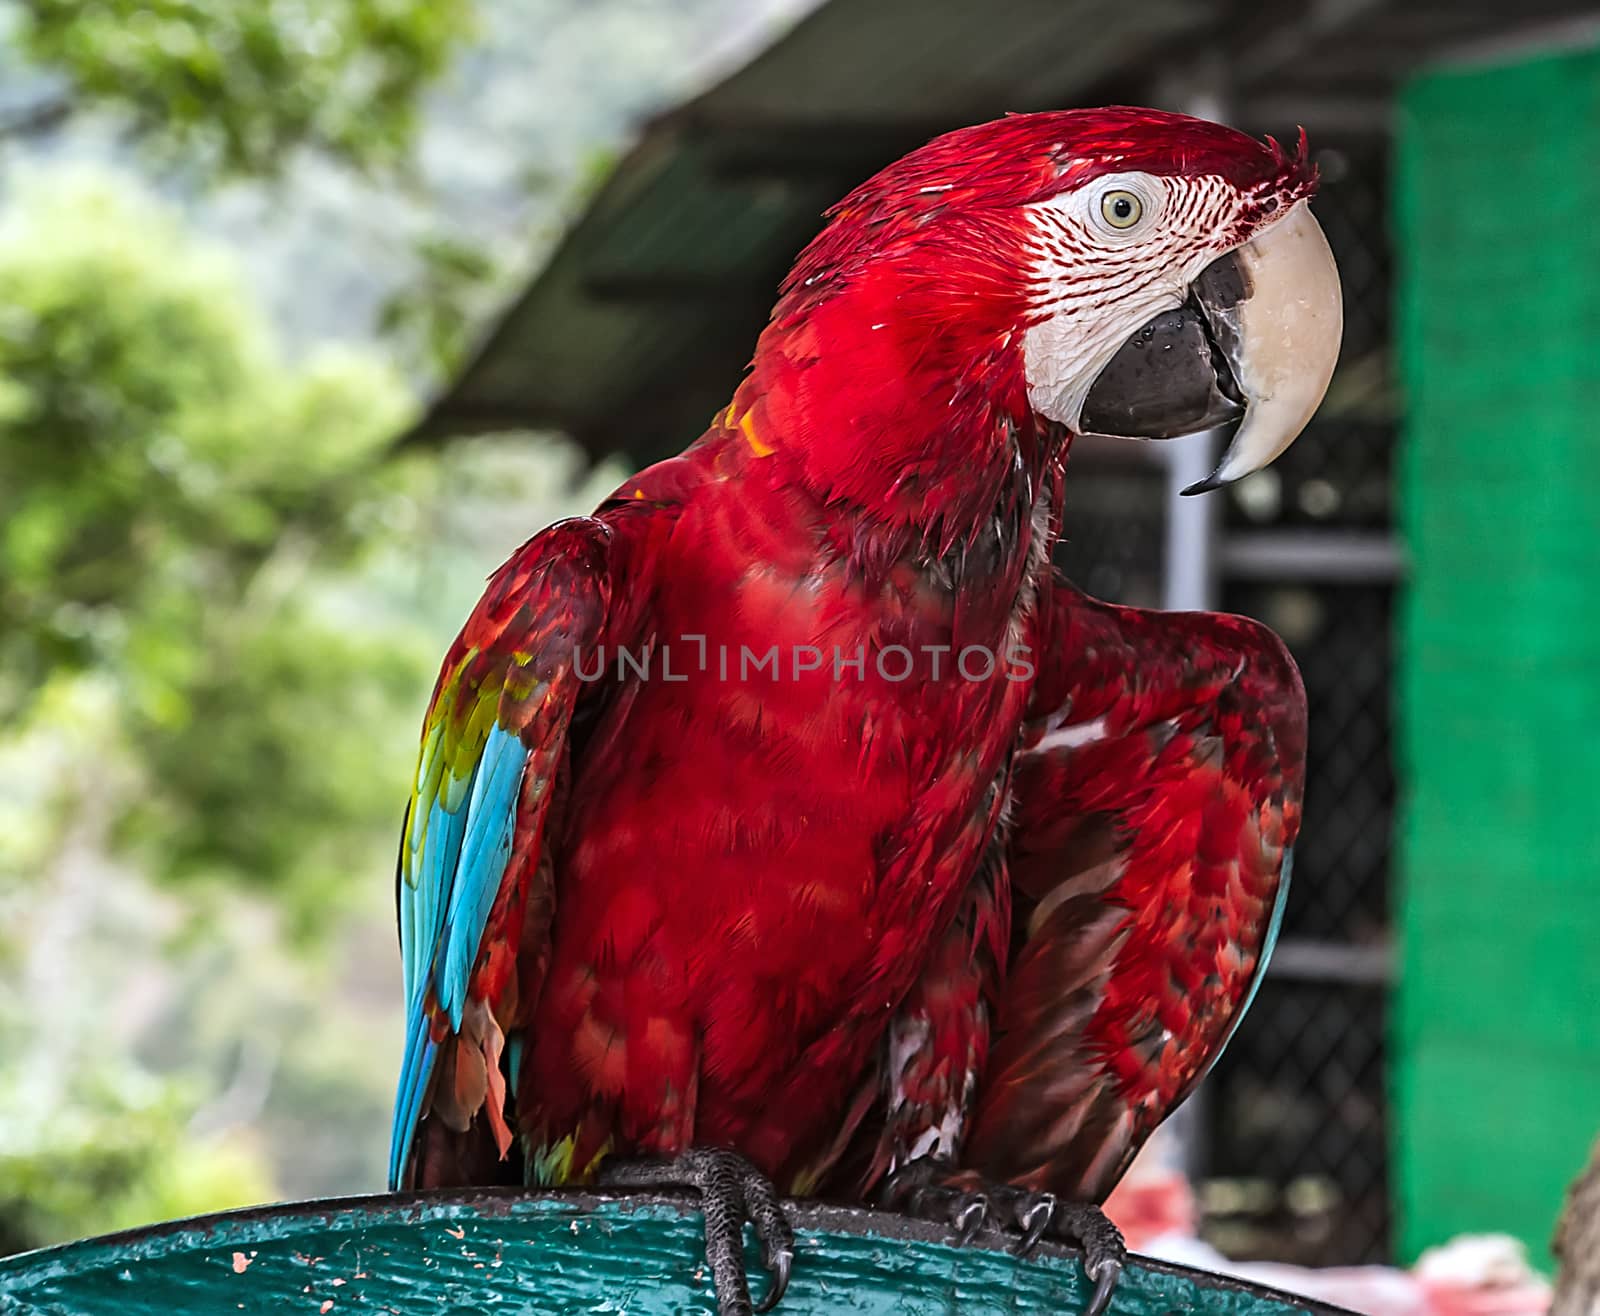 Amazon Jungle Parrot Colorful macaw parrots front view Colorful red tropical bird